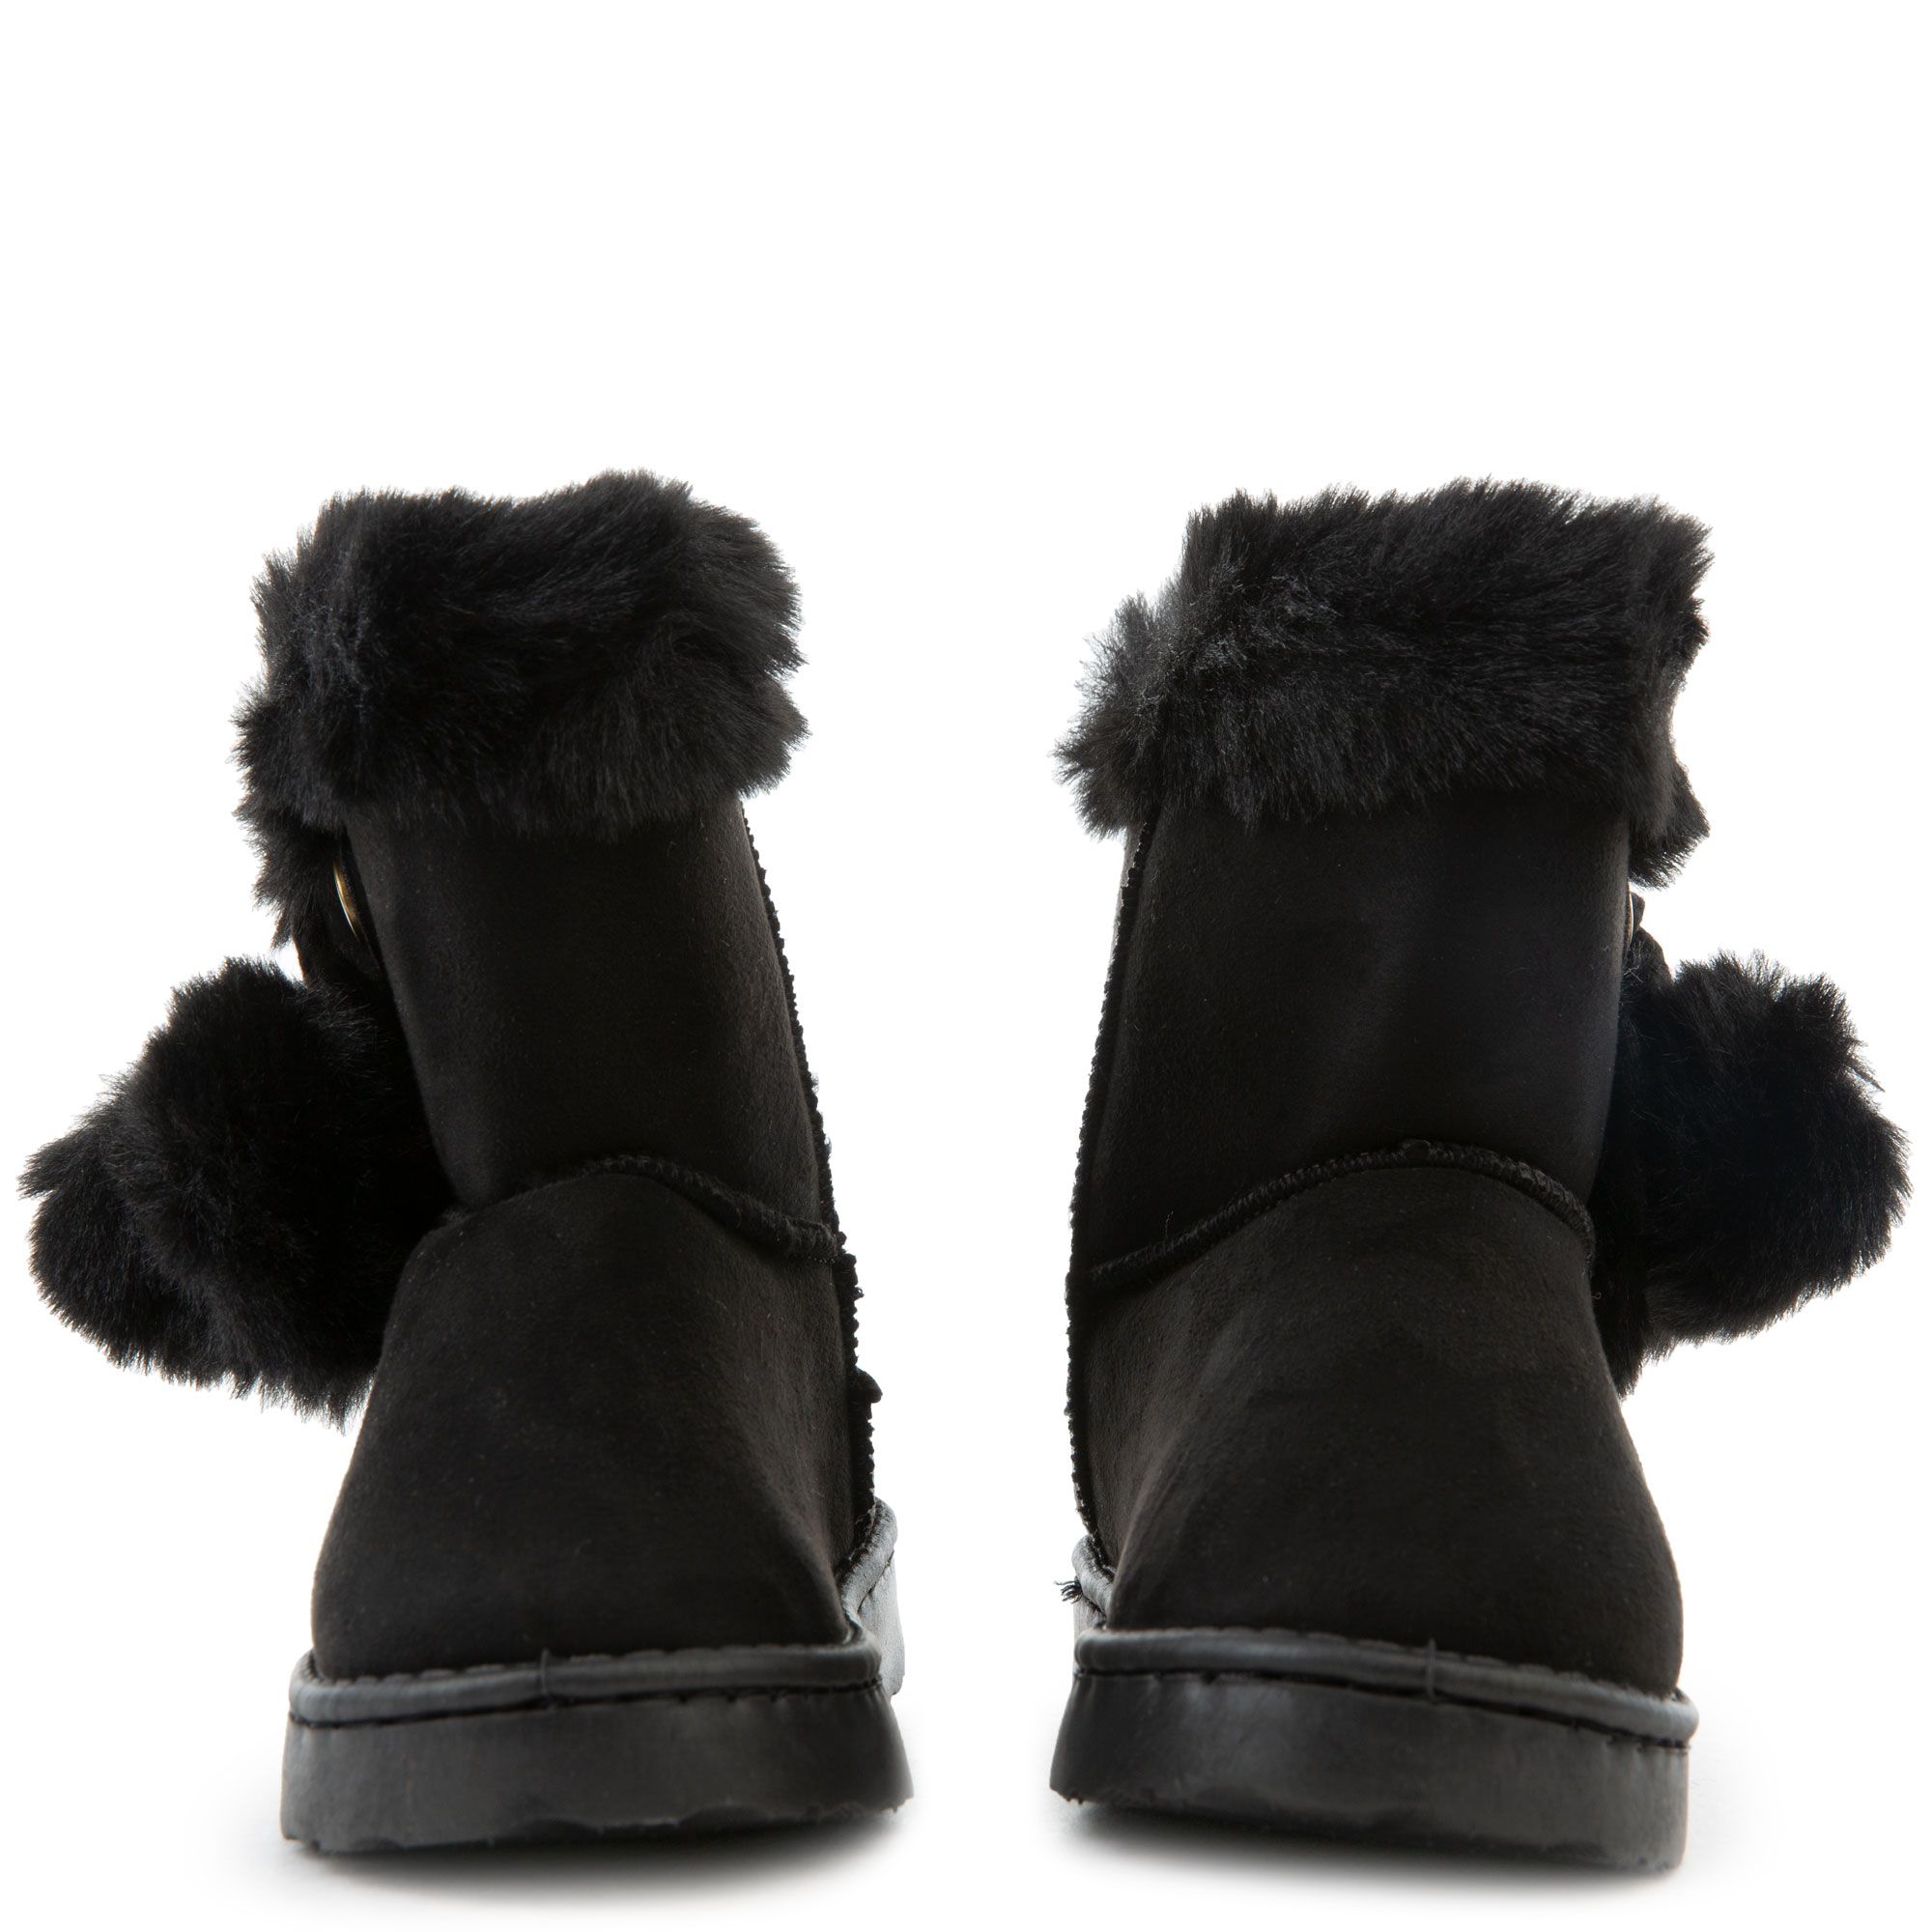 UNKNOWN (PS) Mid-Calf Fur Boots R001-1917K-BLK - Shiekh